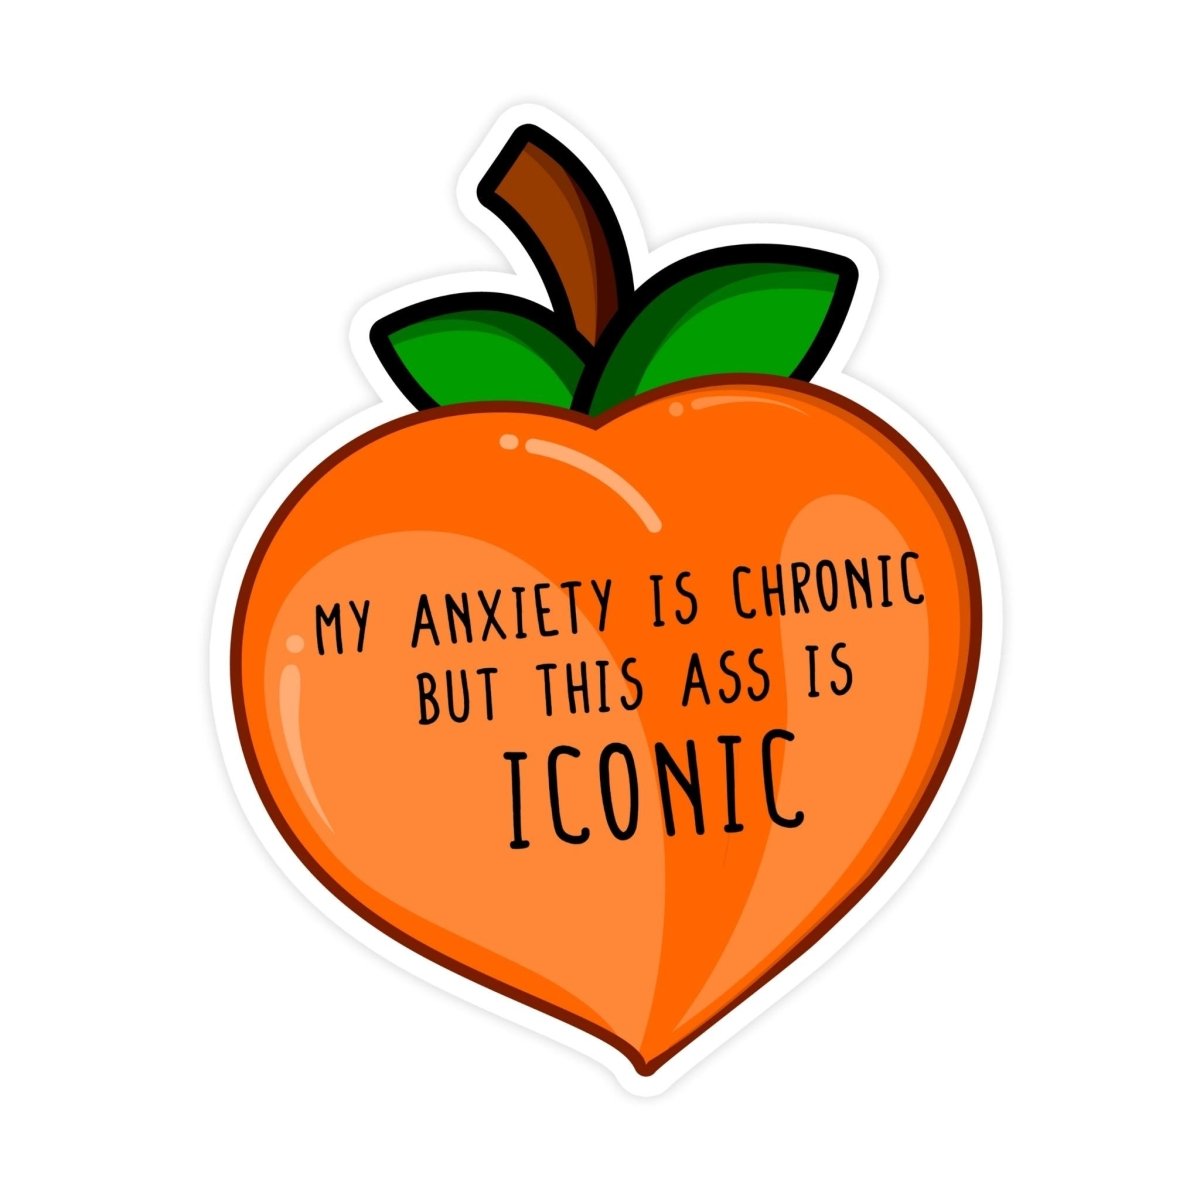 My Anxiety Is Chronic But This Ass Is Iconic Peach Mental Health Sticker - stickerbullMy Anxiety Is Chronic But This Ass Is Iconic Peach Mental Health StickerRetail StickerstickerbullstickerbullTaylor_AssIconic [#54]My Anxiety Is Chronic But This Ass Is Iconic Peach Mental Health Sticker